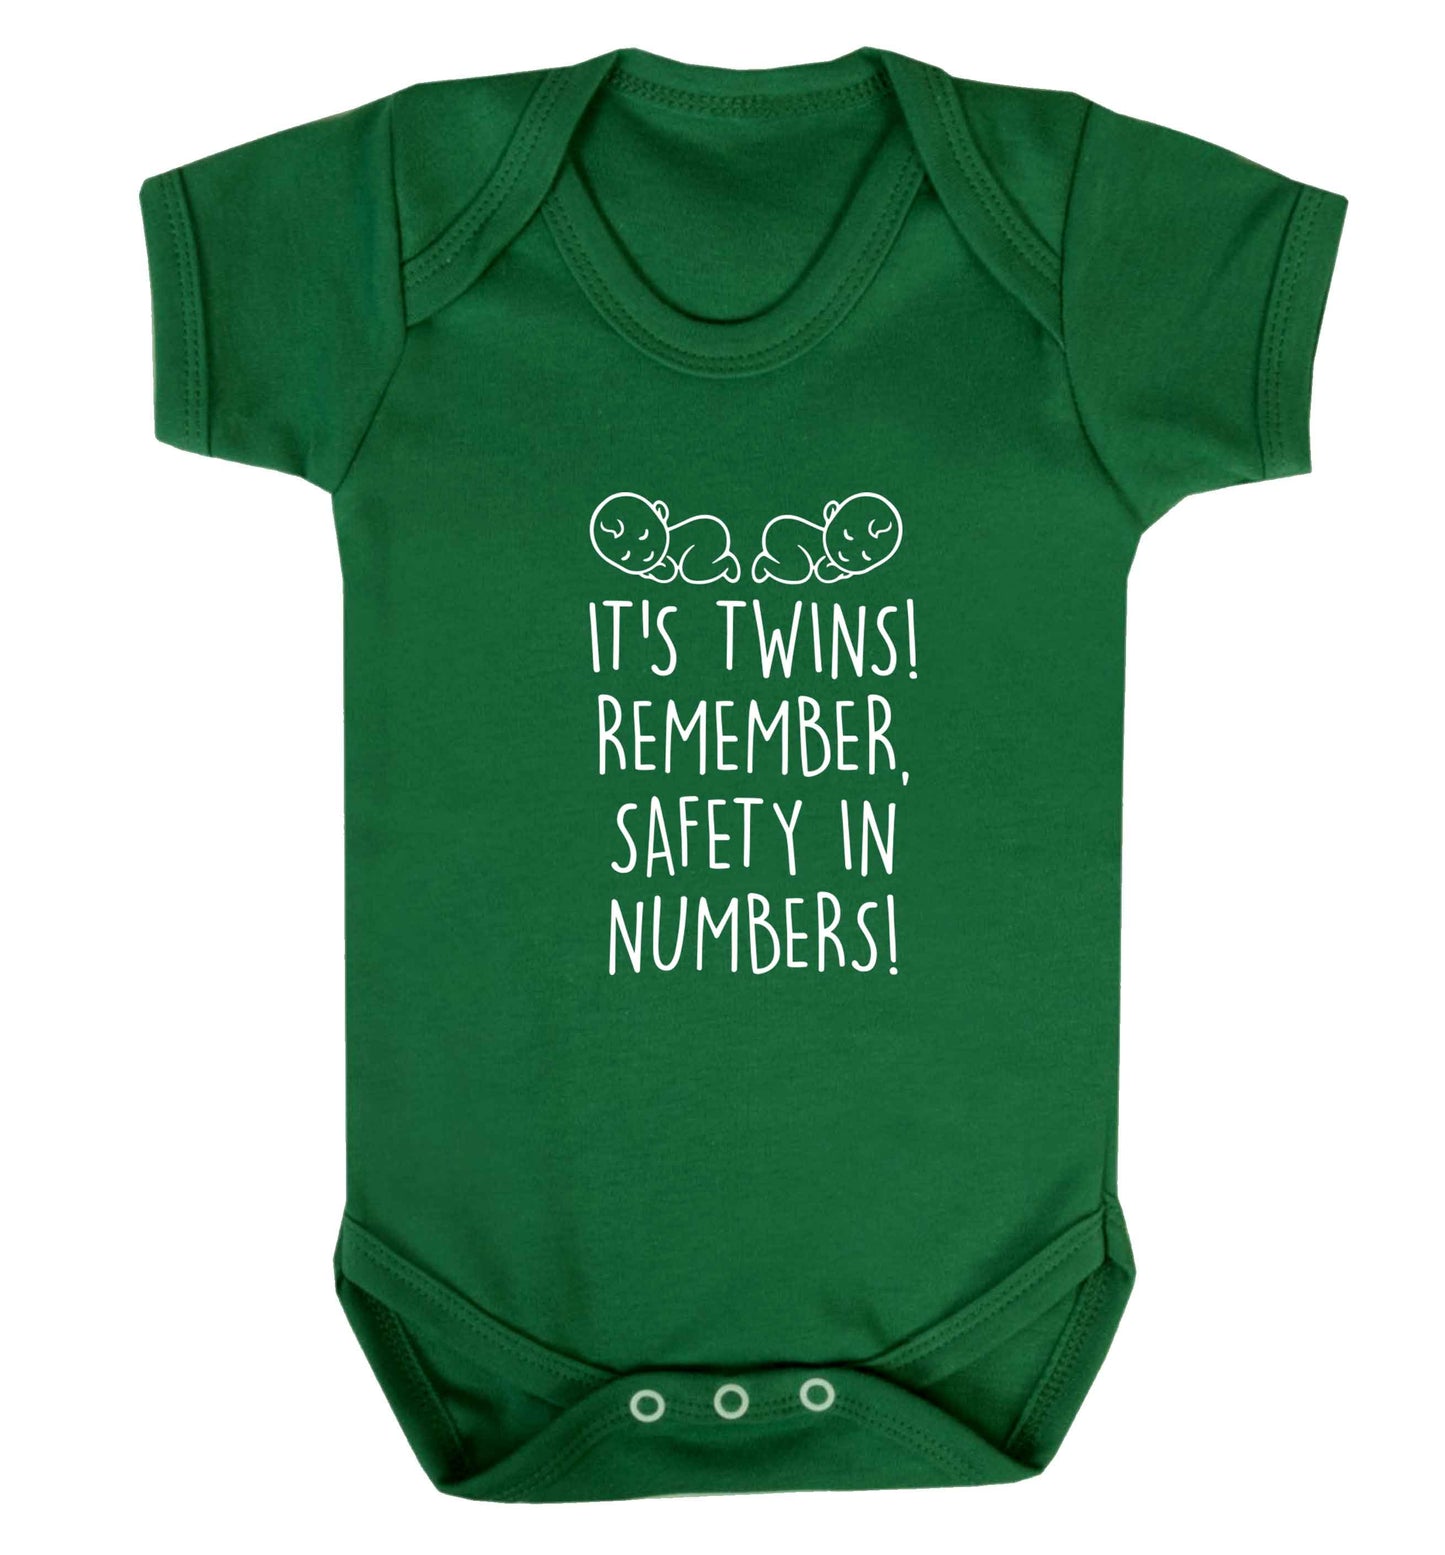 It's twins! Remember safety in numbers! baby vest green 18-24 months